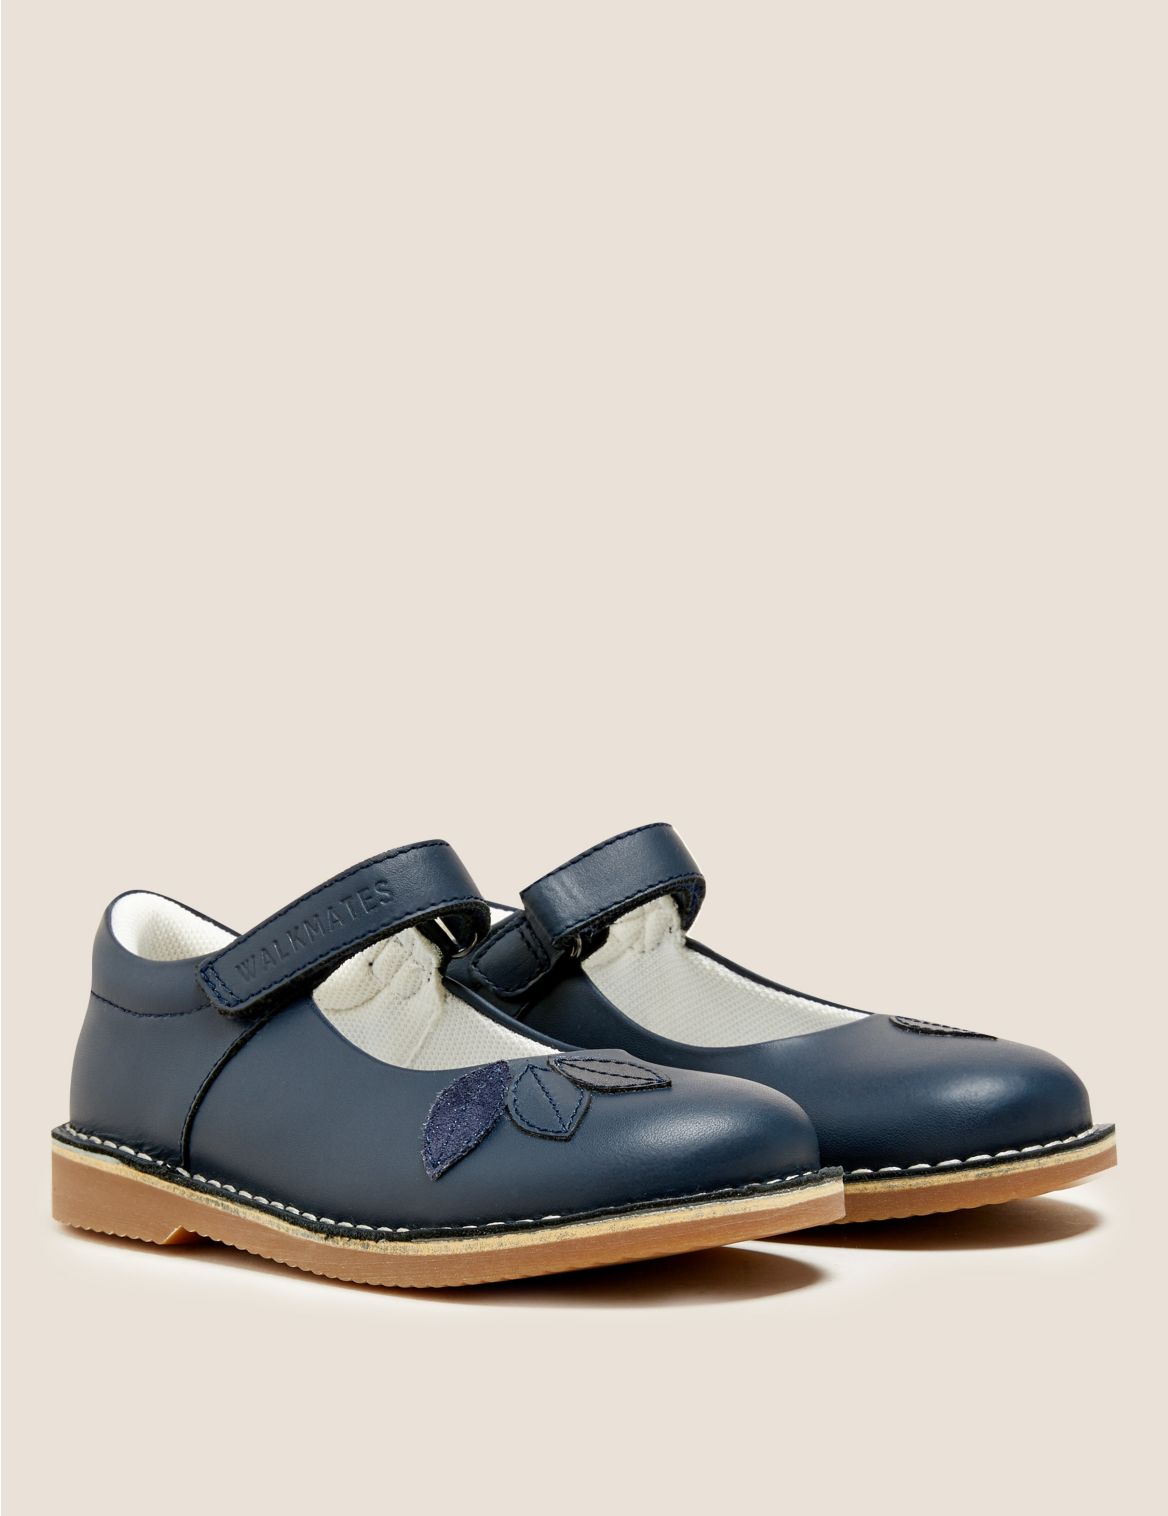 Kids' Leather Leaf Mary Jane Shoes (4 Small - 12 Small) navy